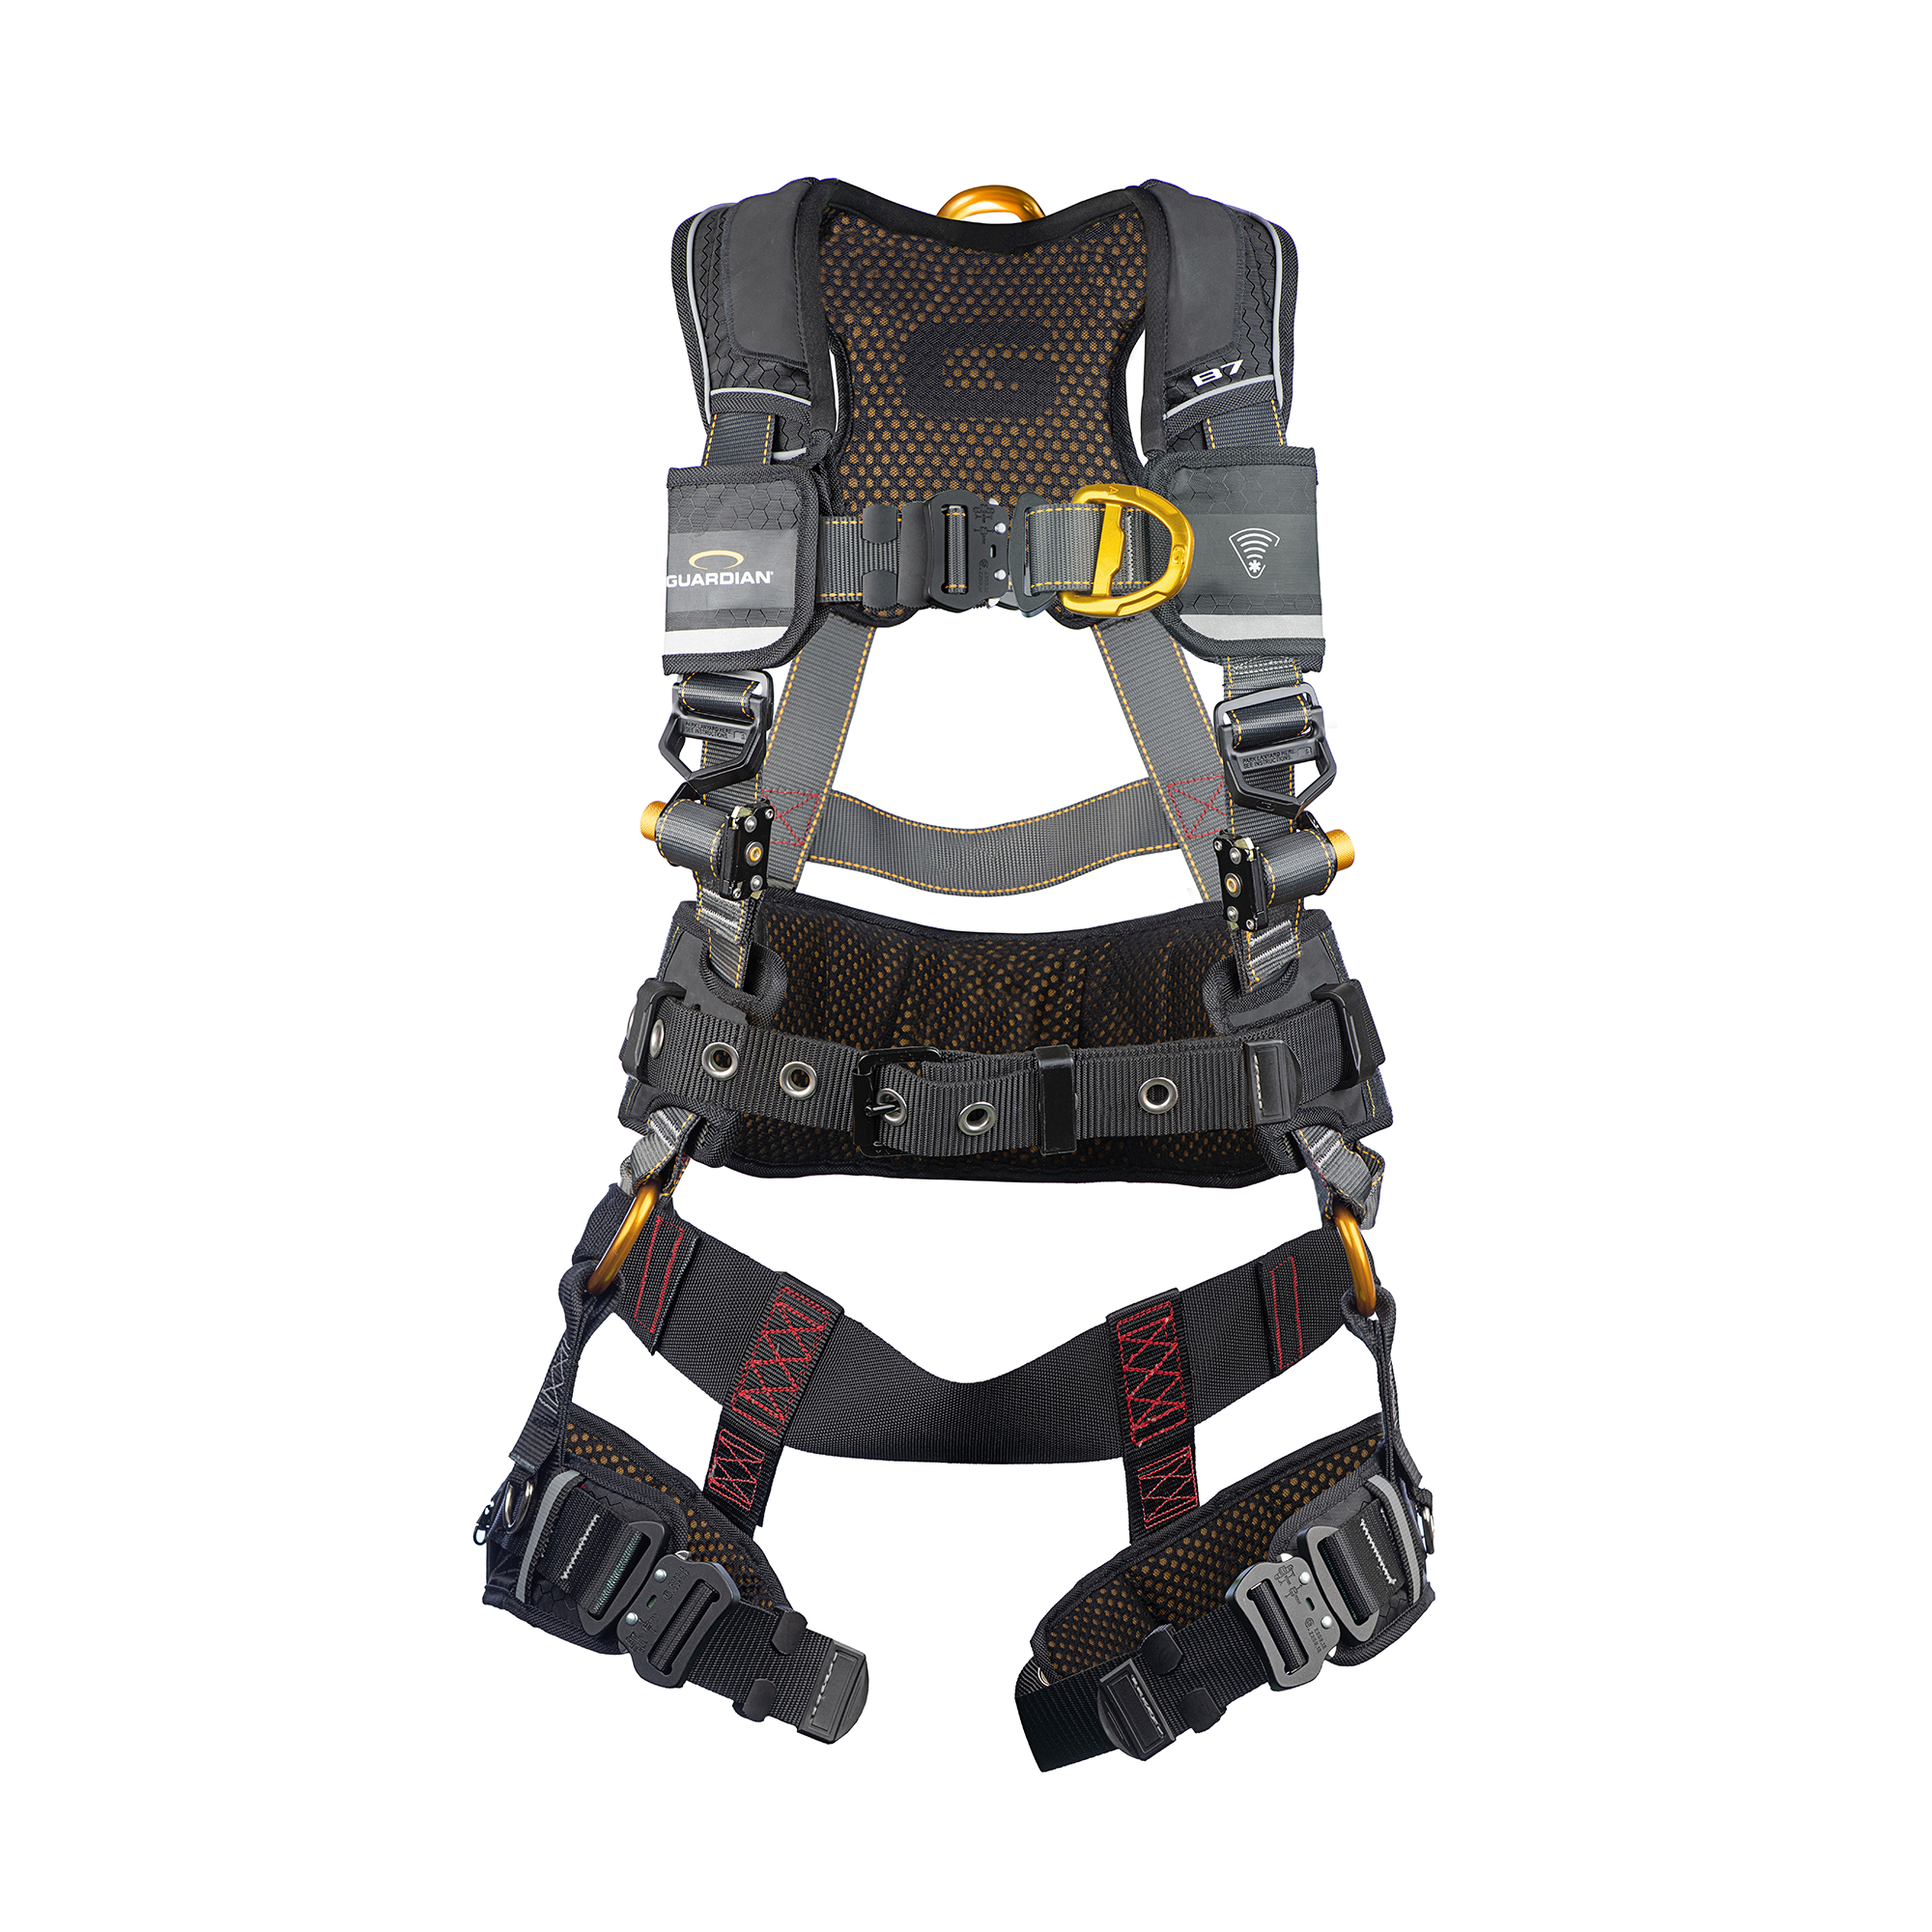 Guardian B7 Comfort Full-Body Harness w/ Waist Pad, Quick-Connect Chest and  Legs, Sternal D